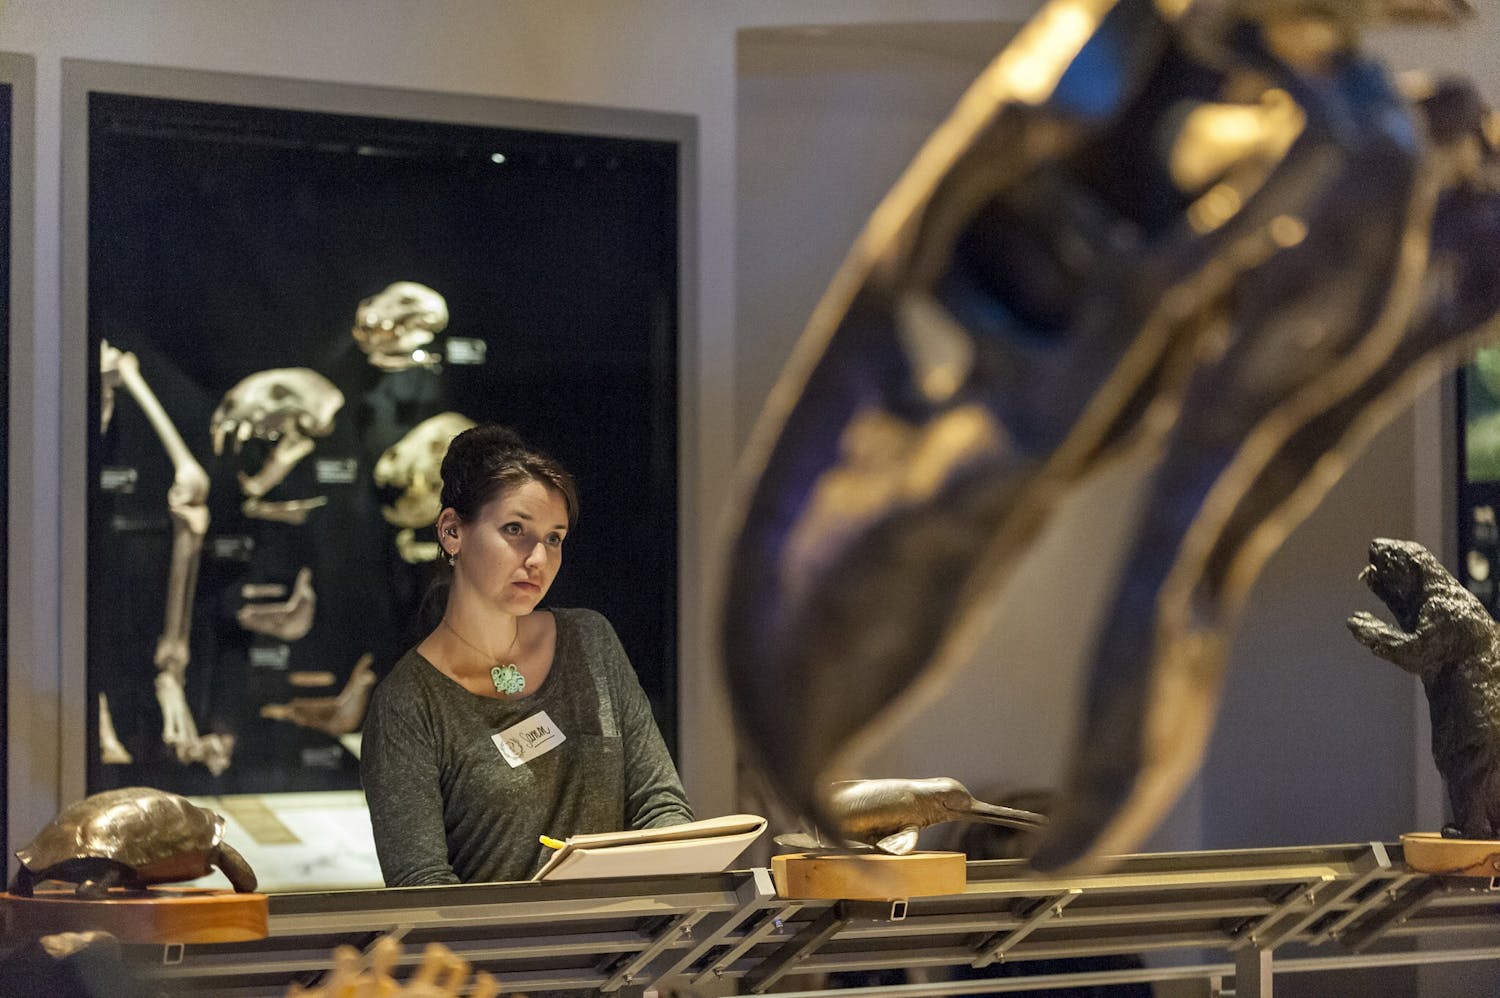 The beauty of science was displayed starting Feb. 8, 2019 at the Florida Museum of Natural History.